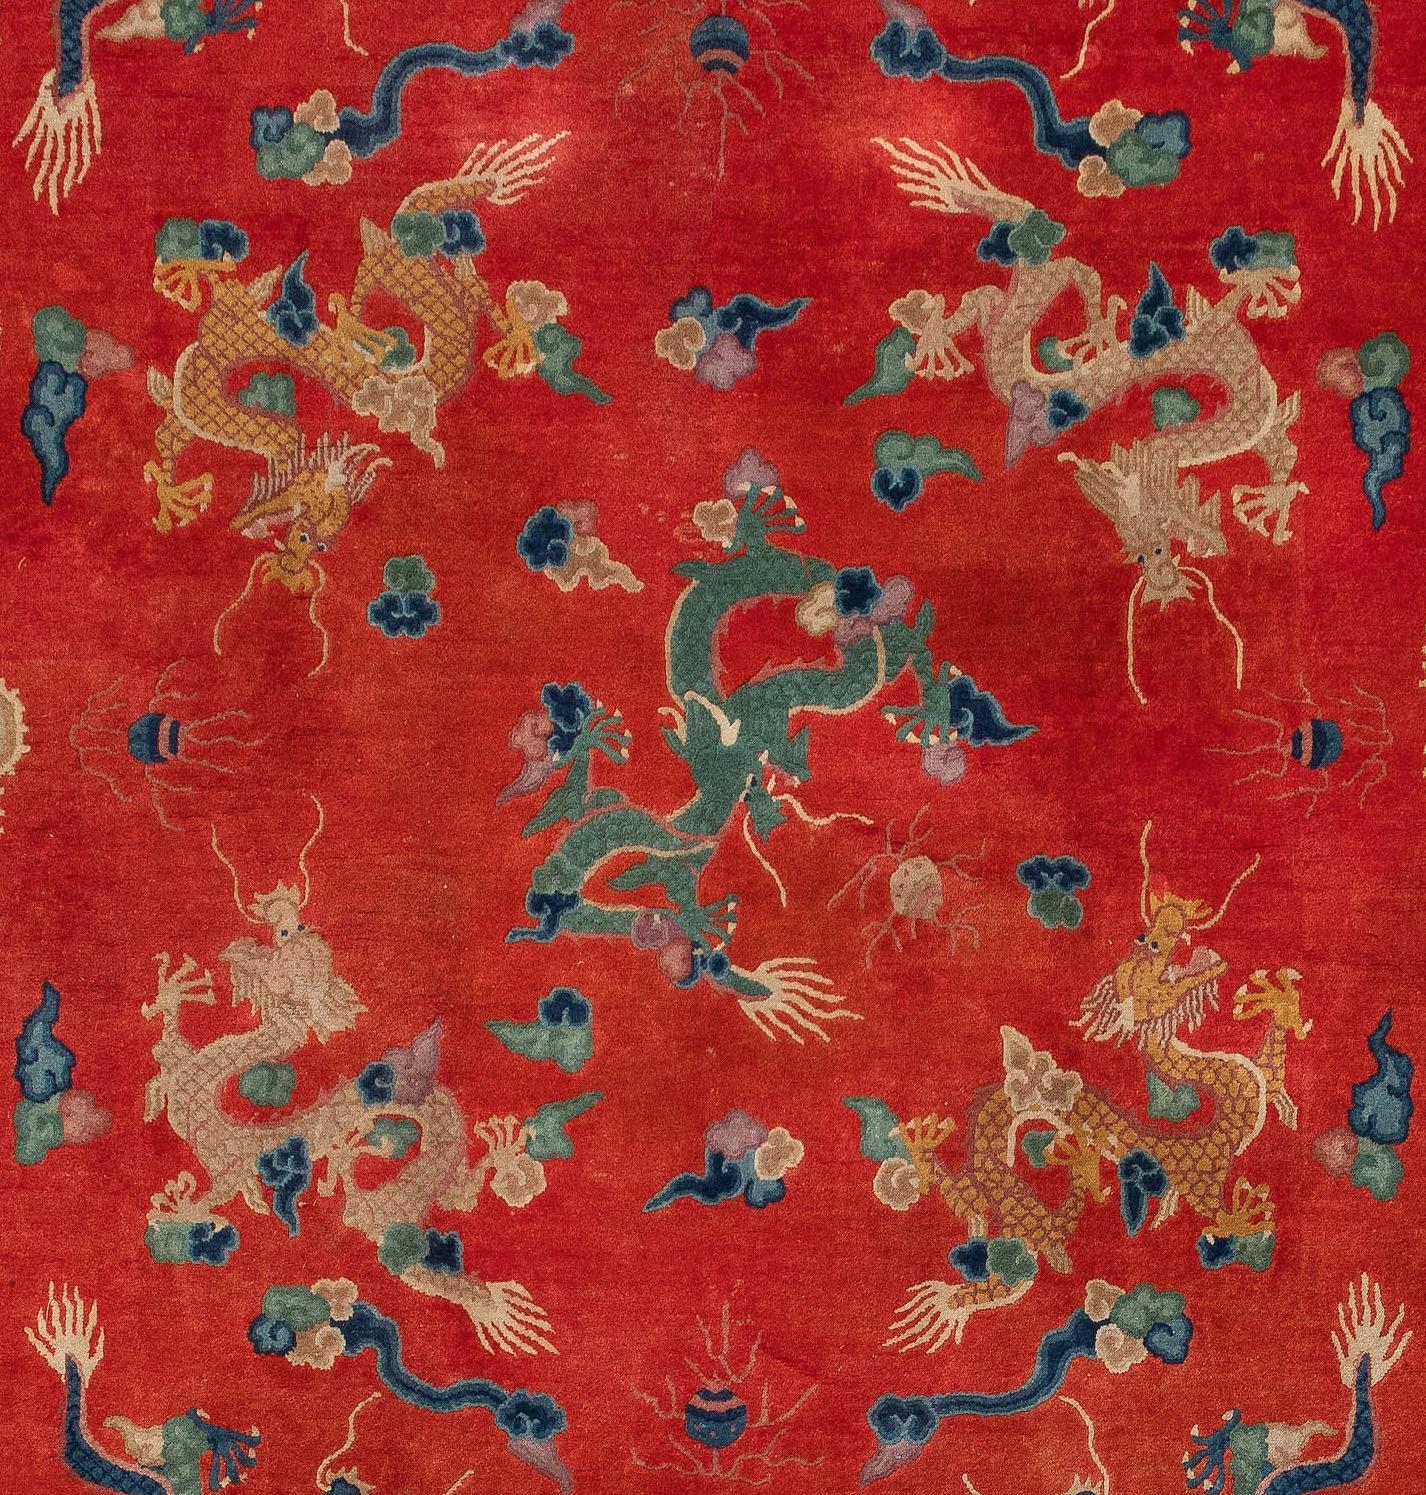 A 9 Dragon Chinese rug in red field. Measures: 8 x 10 ft.

This traditional dragon rug design is typically found on antique rugs from Beijing / Peking and Ningxia. On this rug it shows 9 dragons in the inner field. 9 is a lucky number in Chinese